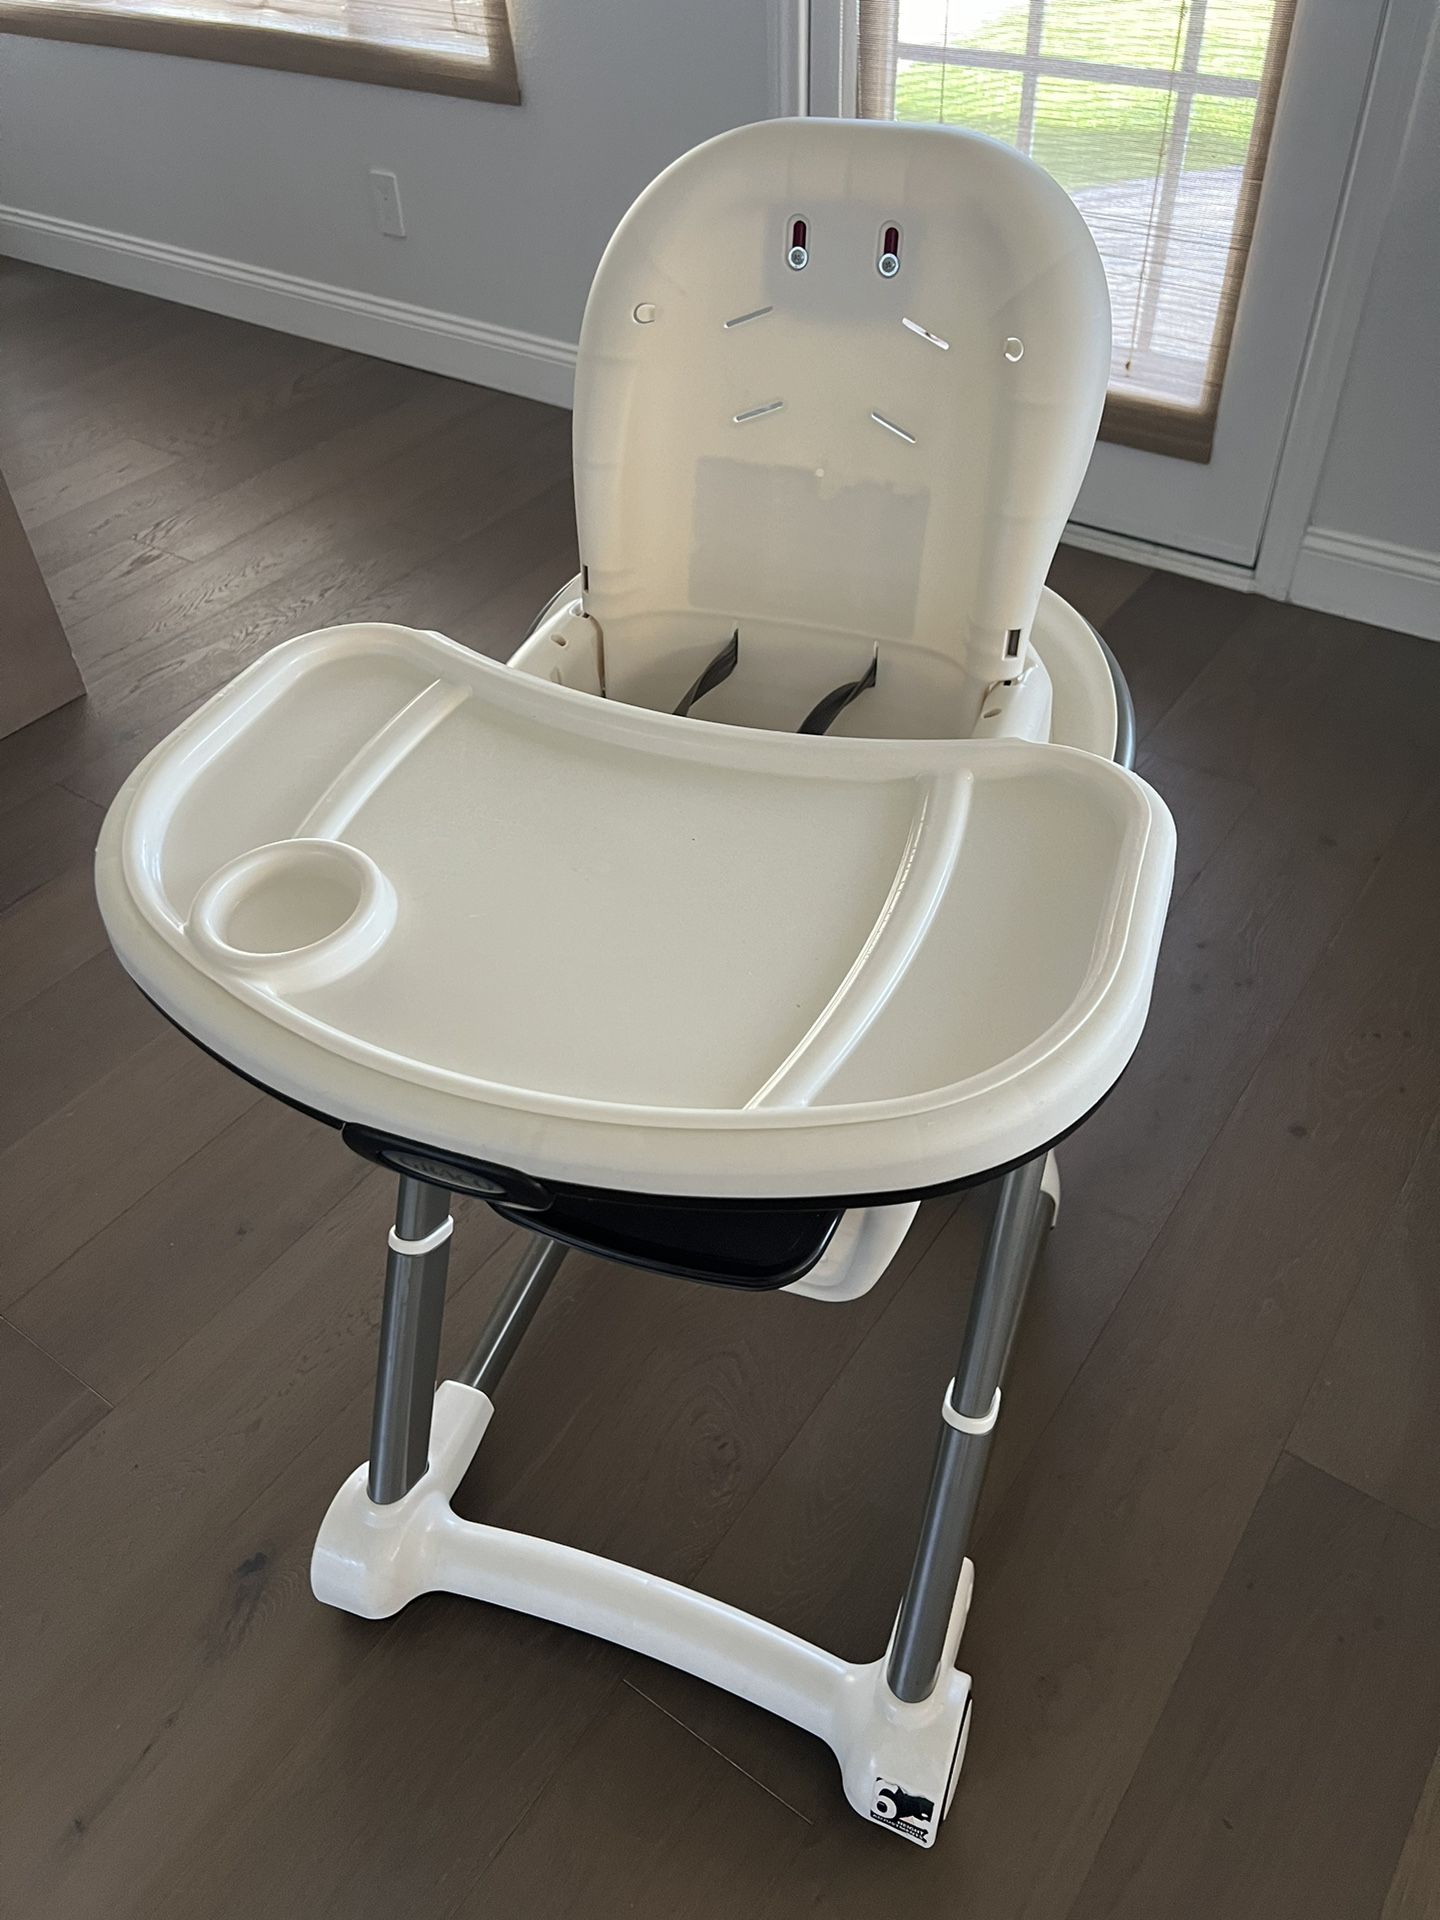 Graco Rolling High Chair